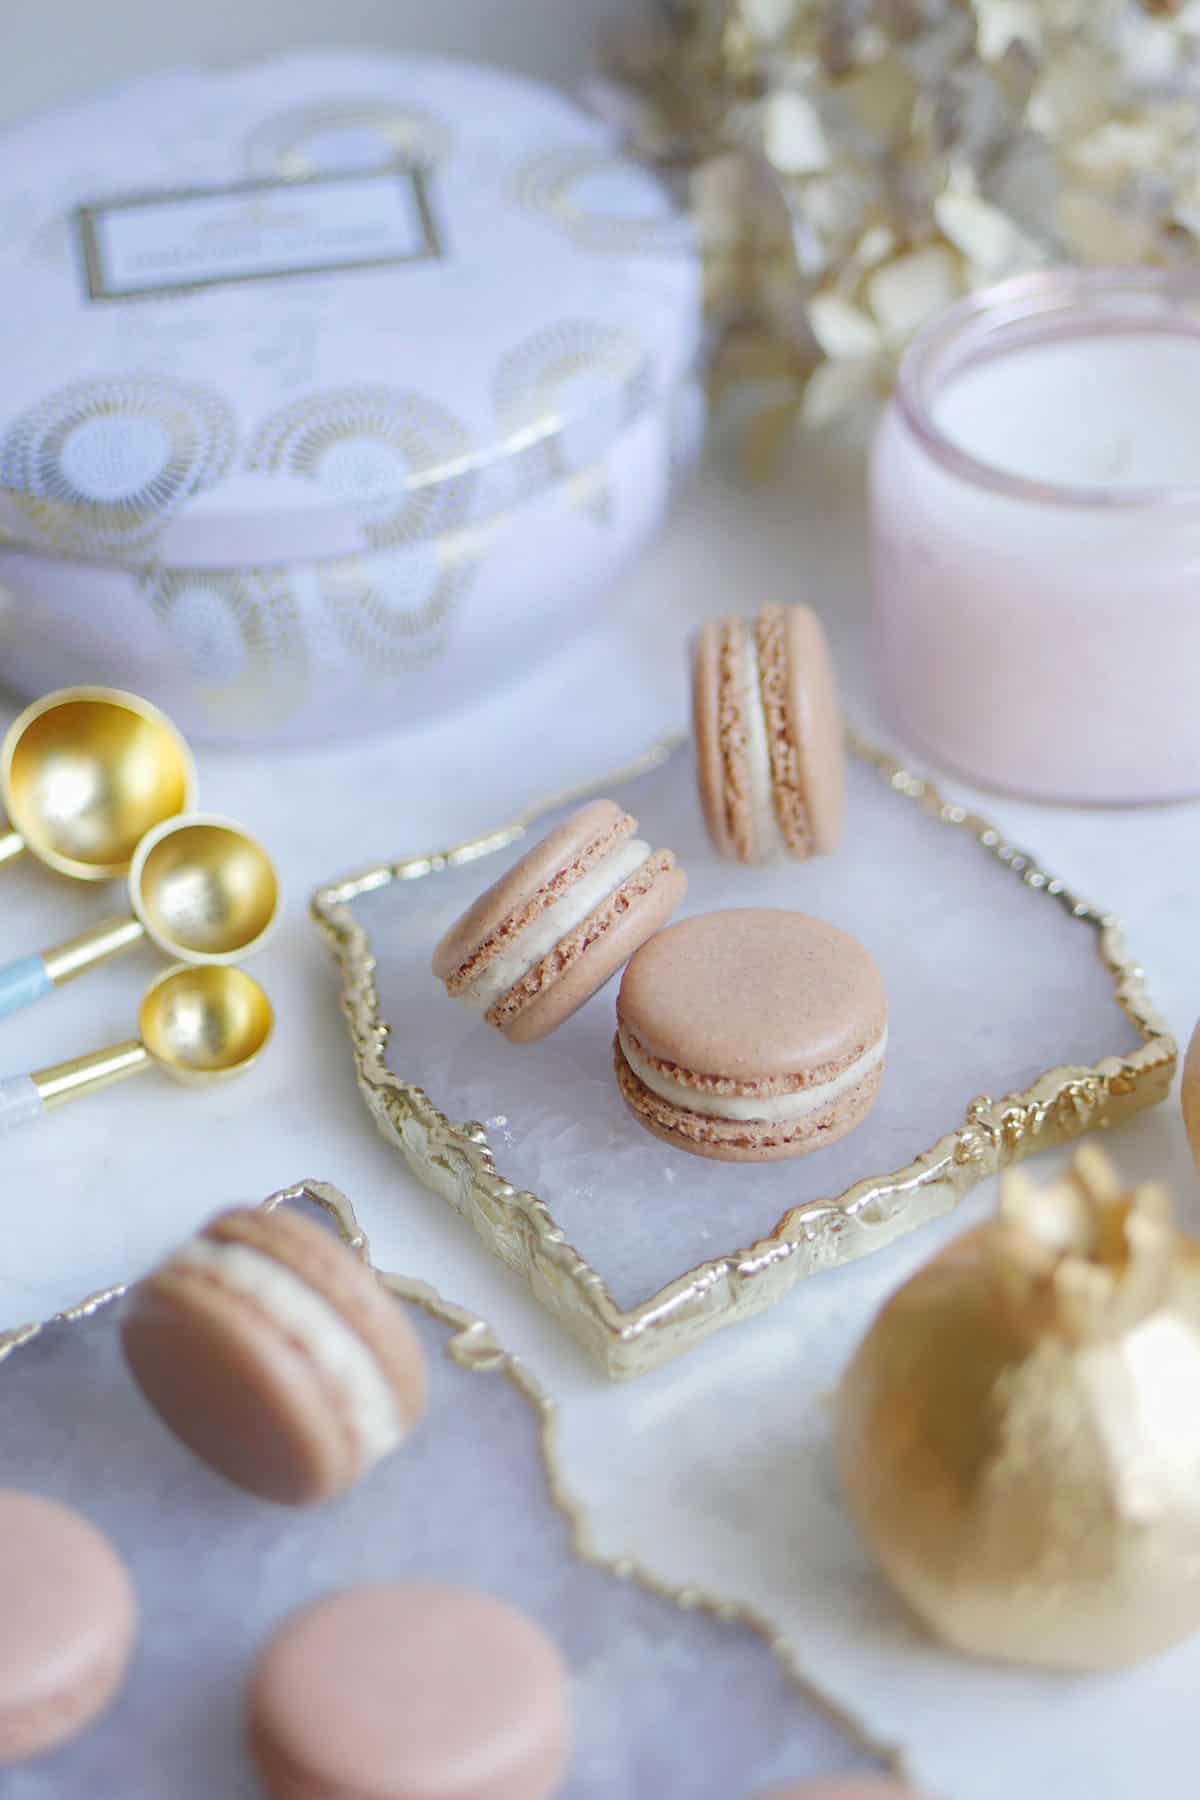 A bunch of gingerbread spice macarons amongst a variety of kitchen utensils and plates with gold trim. 